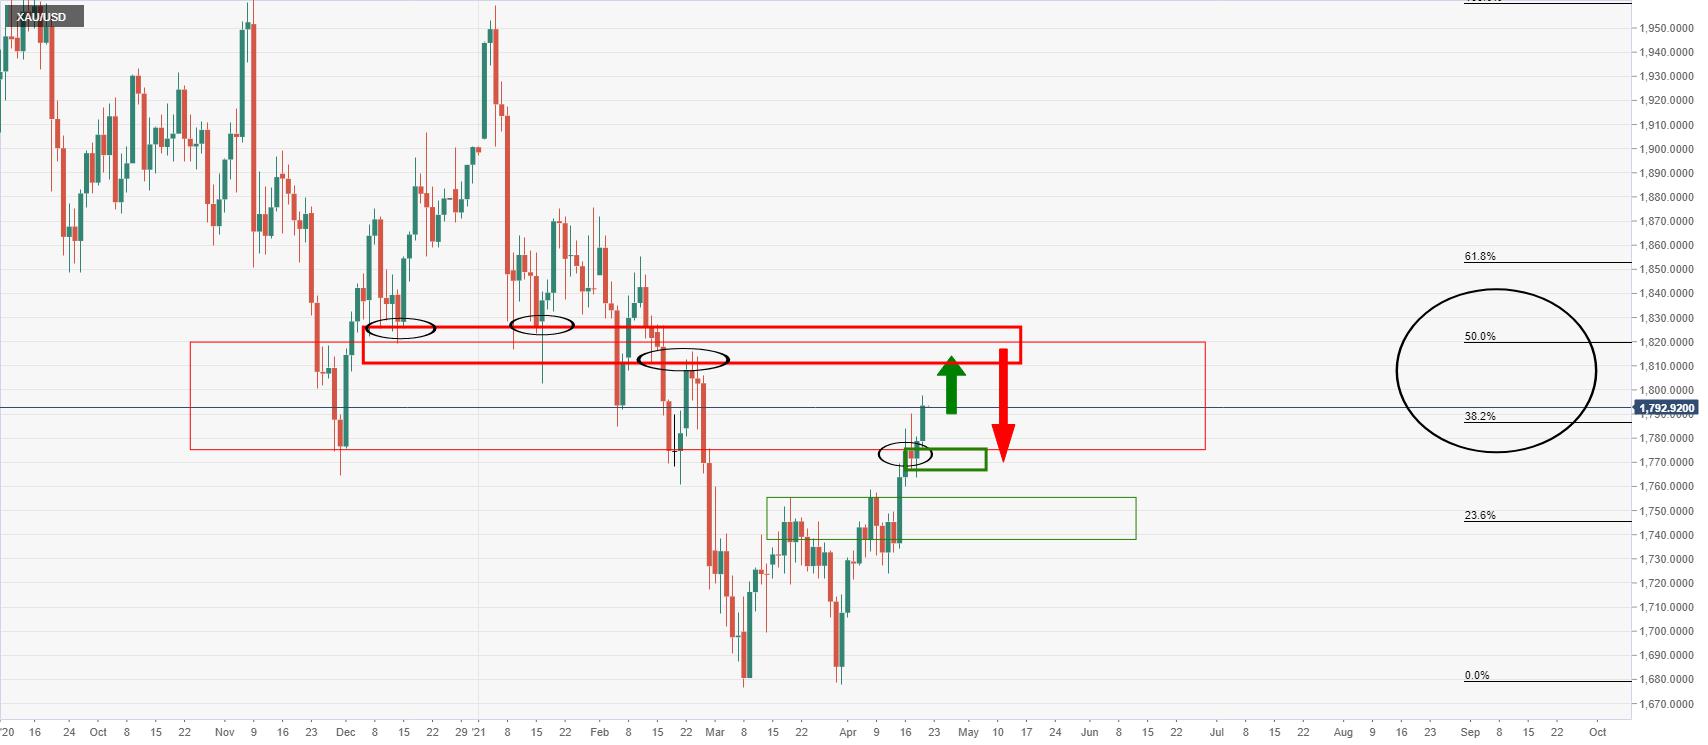 Gold Price Analysis: Bulls head towards a monthly 50% mean reversion